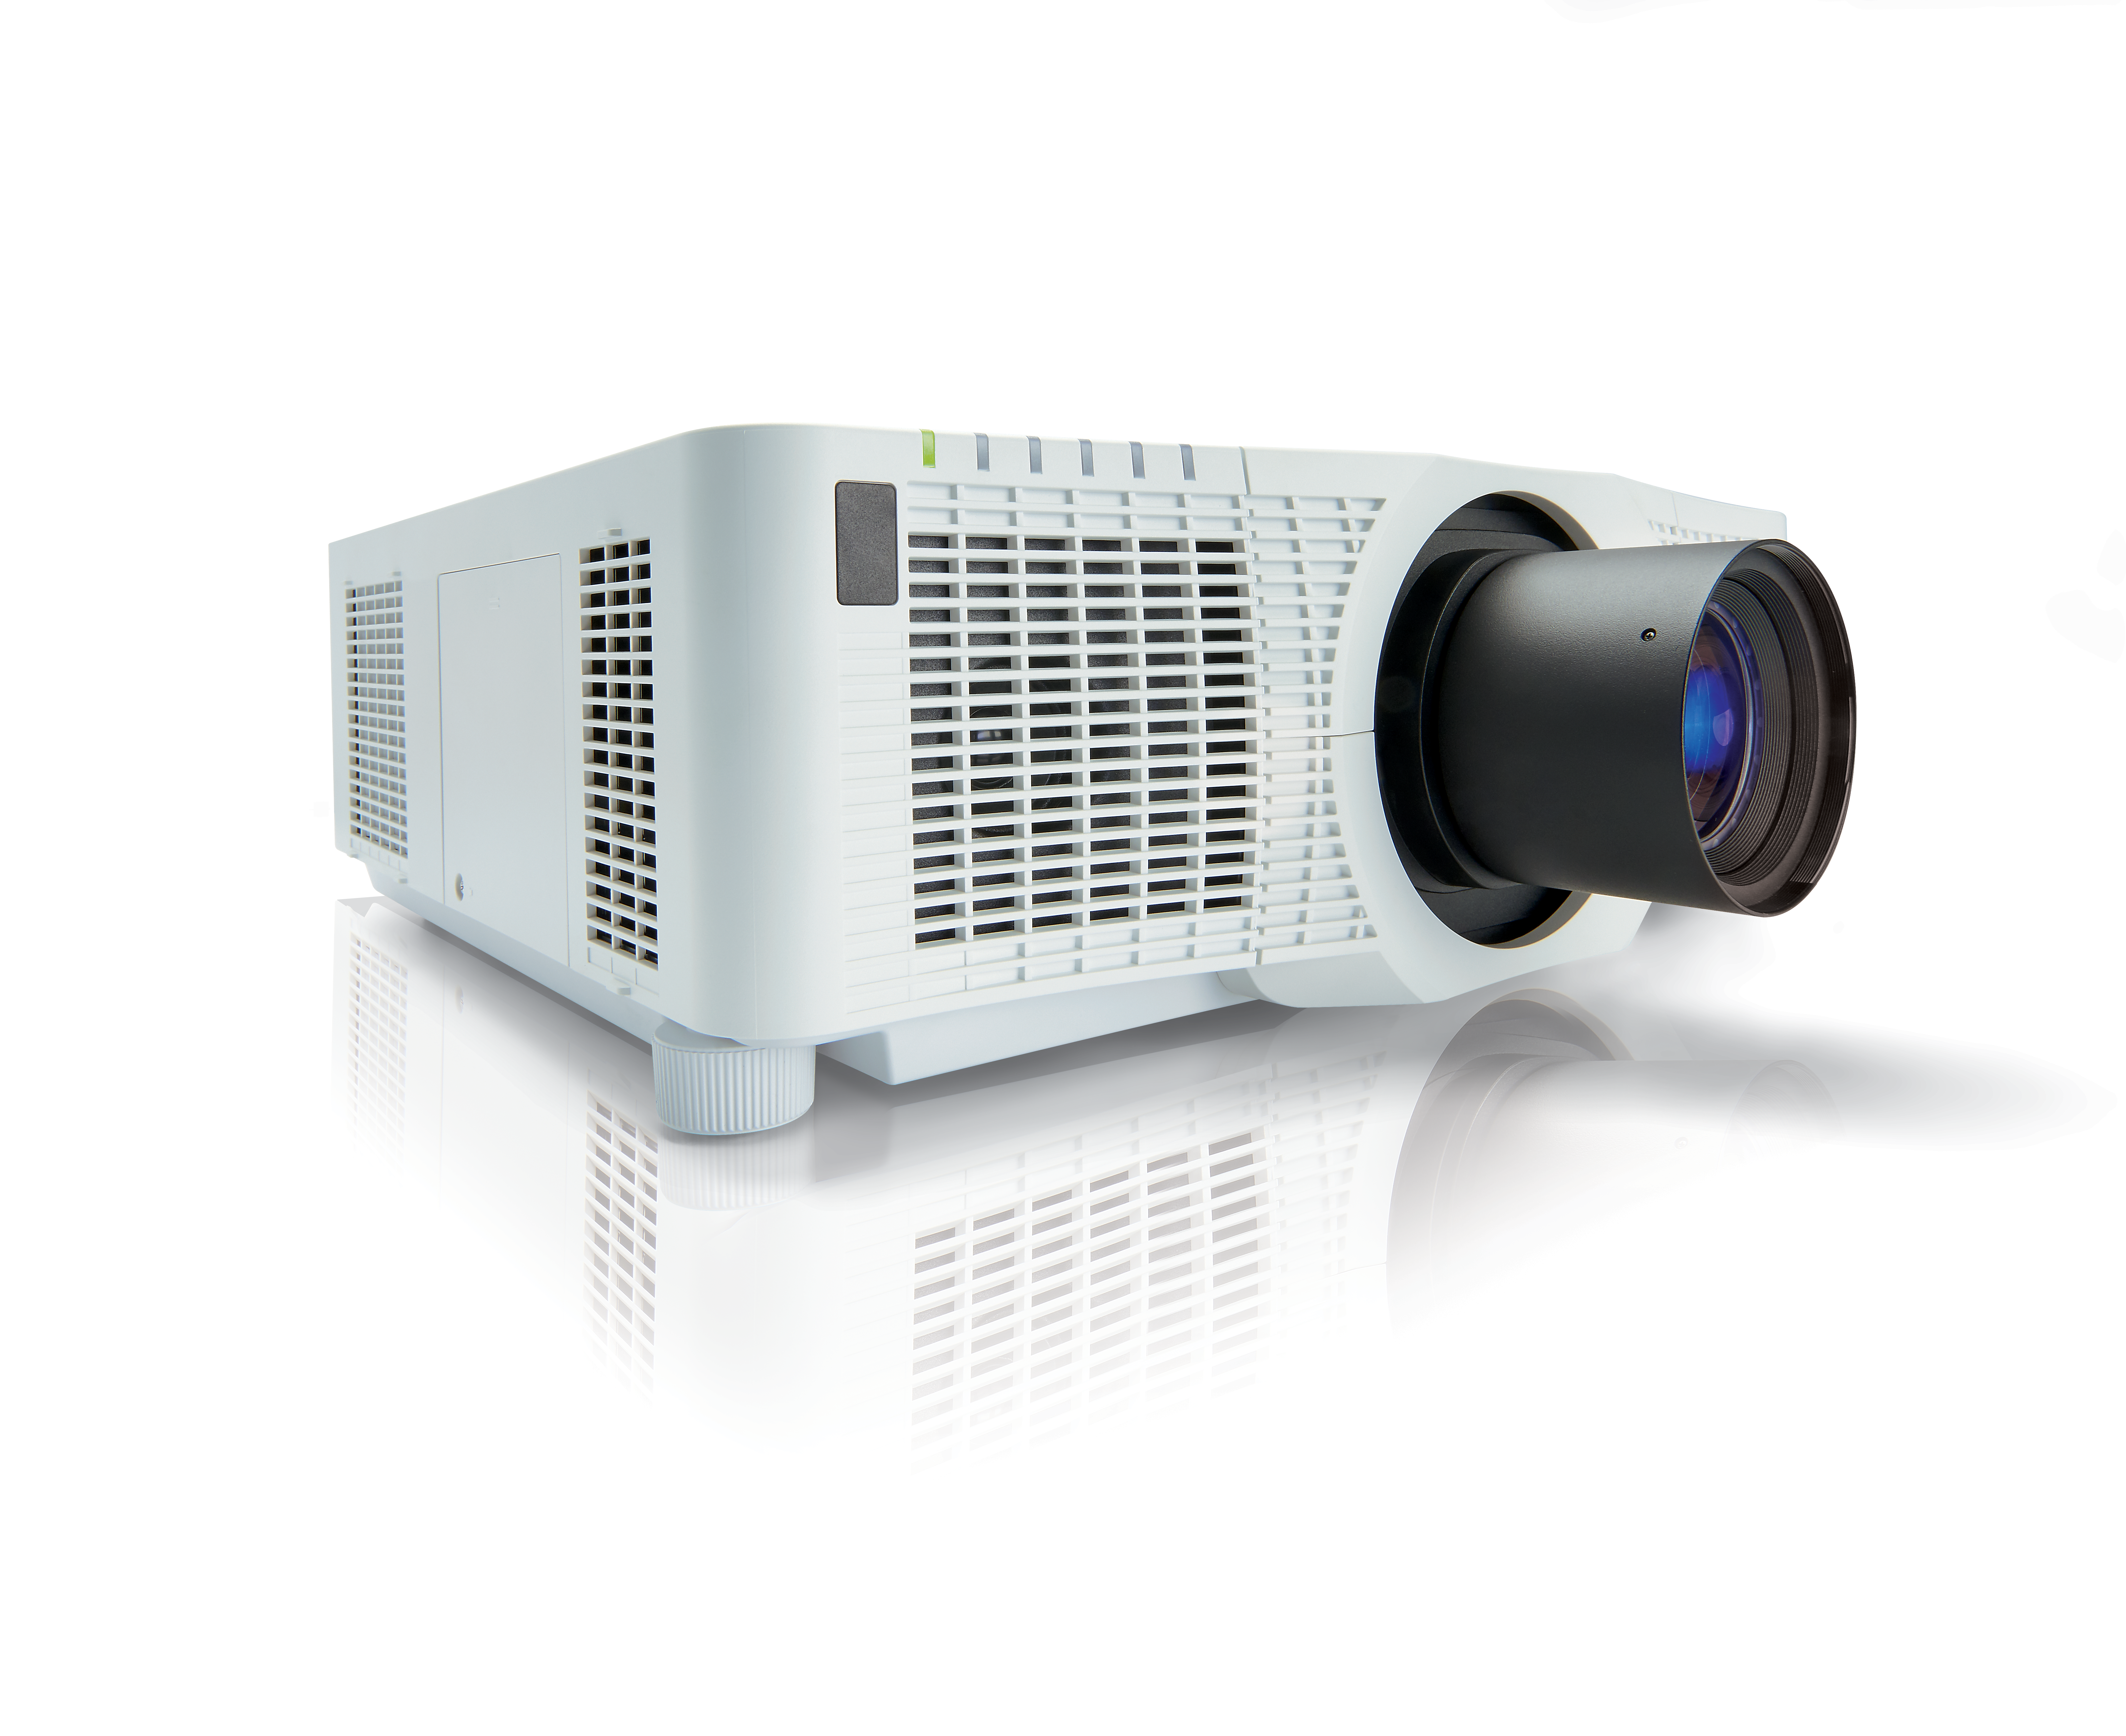 Christie LW651i-D 3LCD projector | 121-035109-XX (White only)